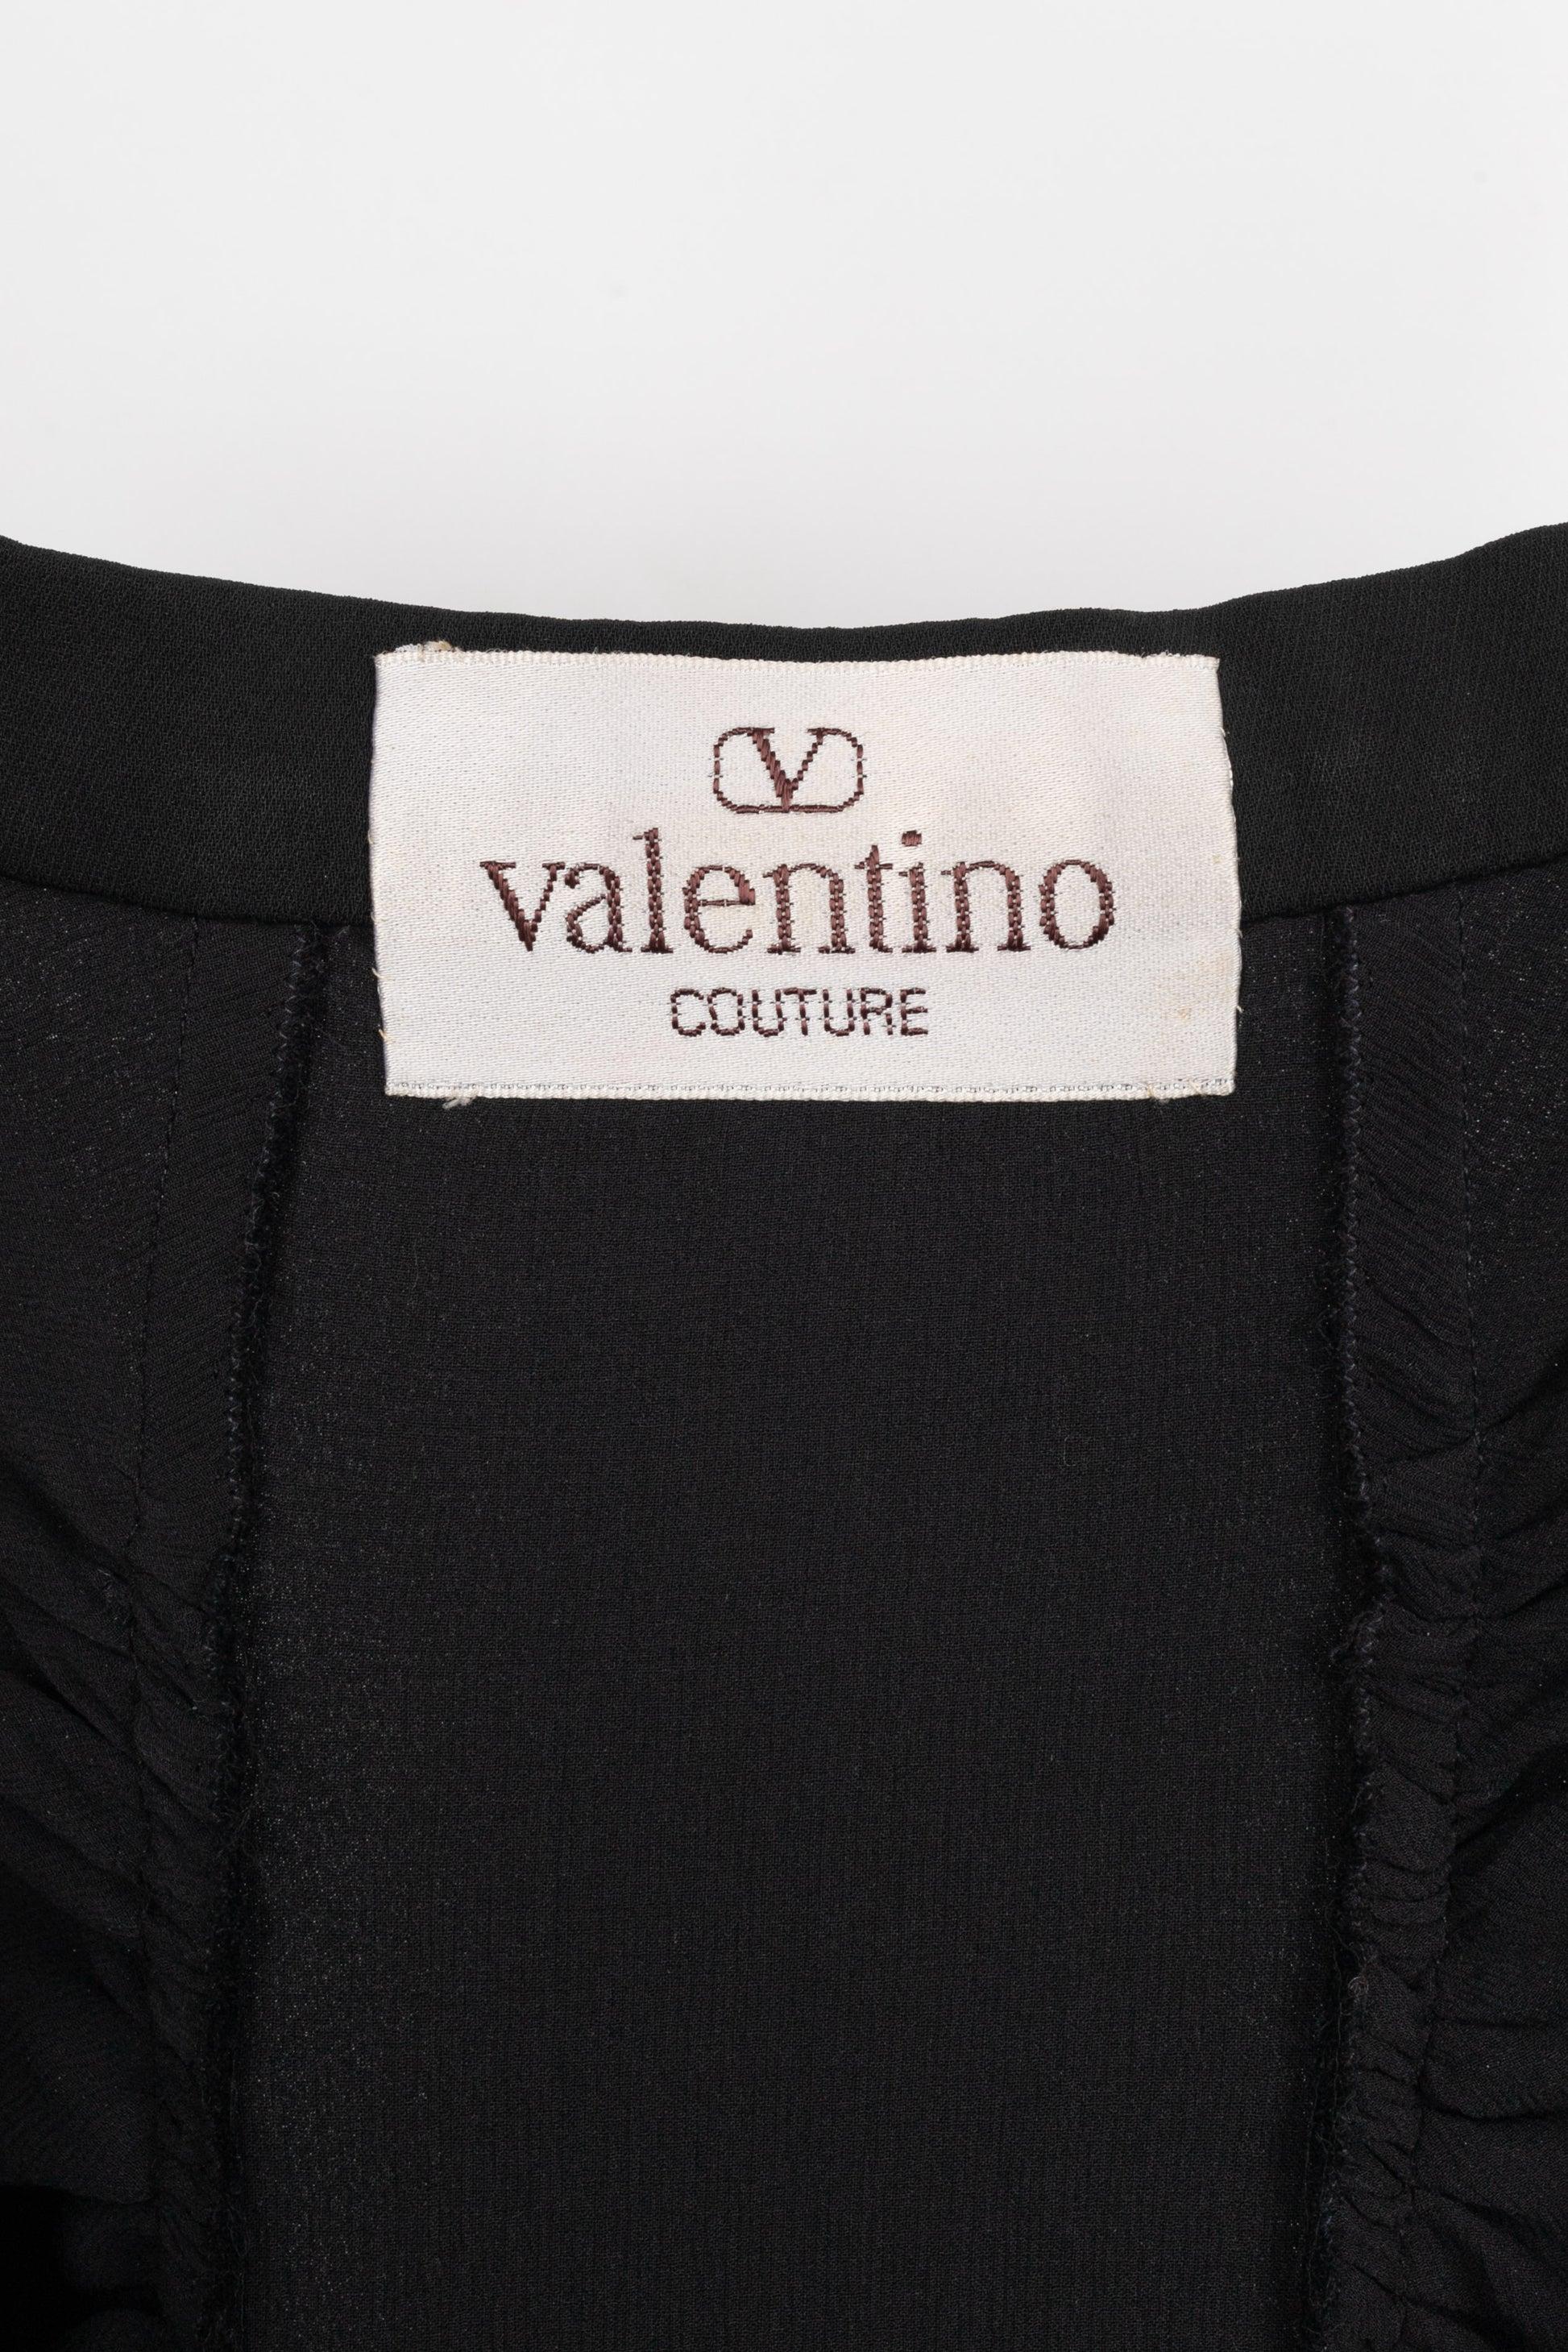 Valentino Haute Couture Set Composed of a Taffeta Top Embroidered with Sequins For Sale 5